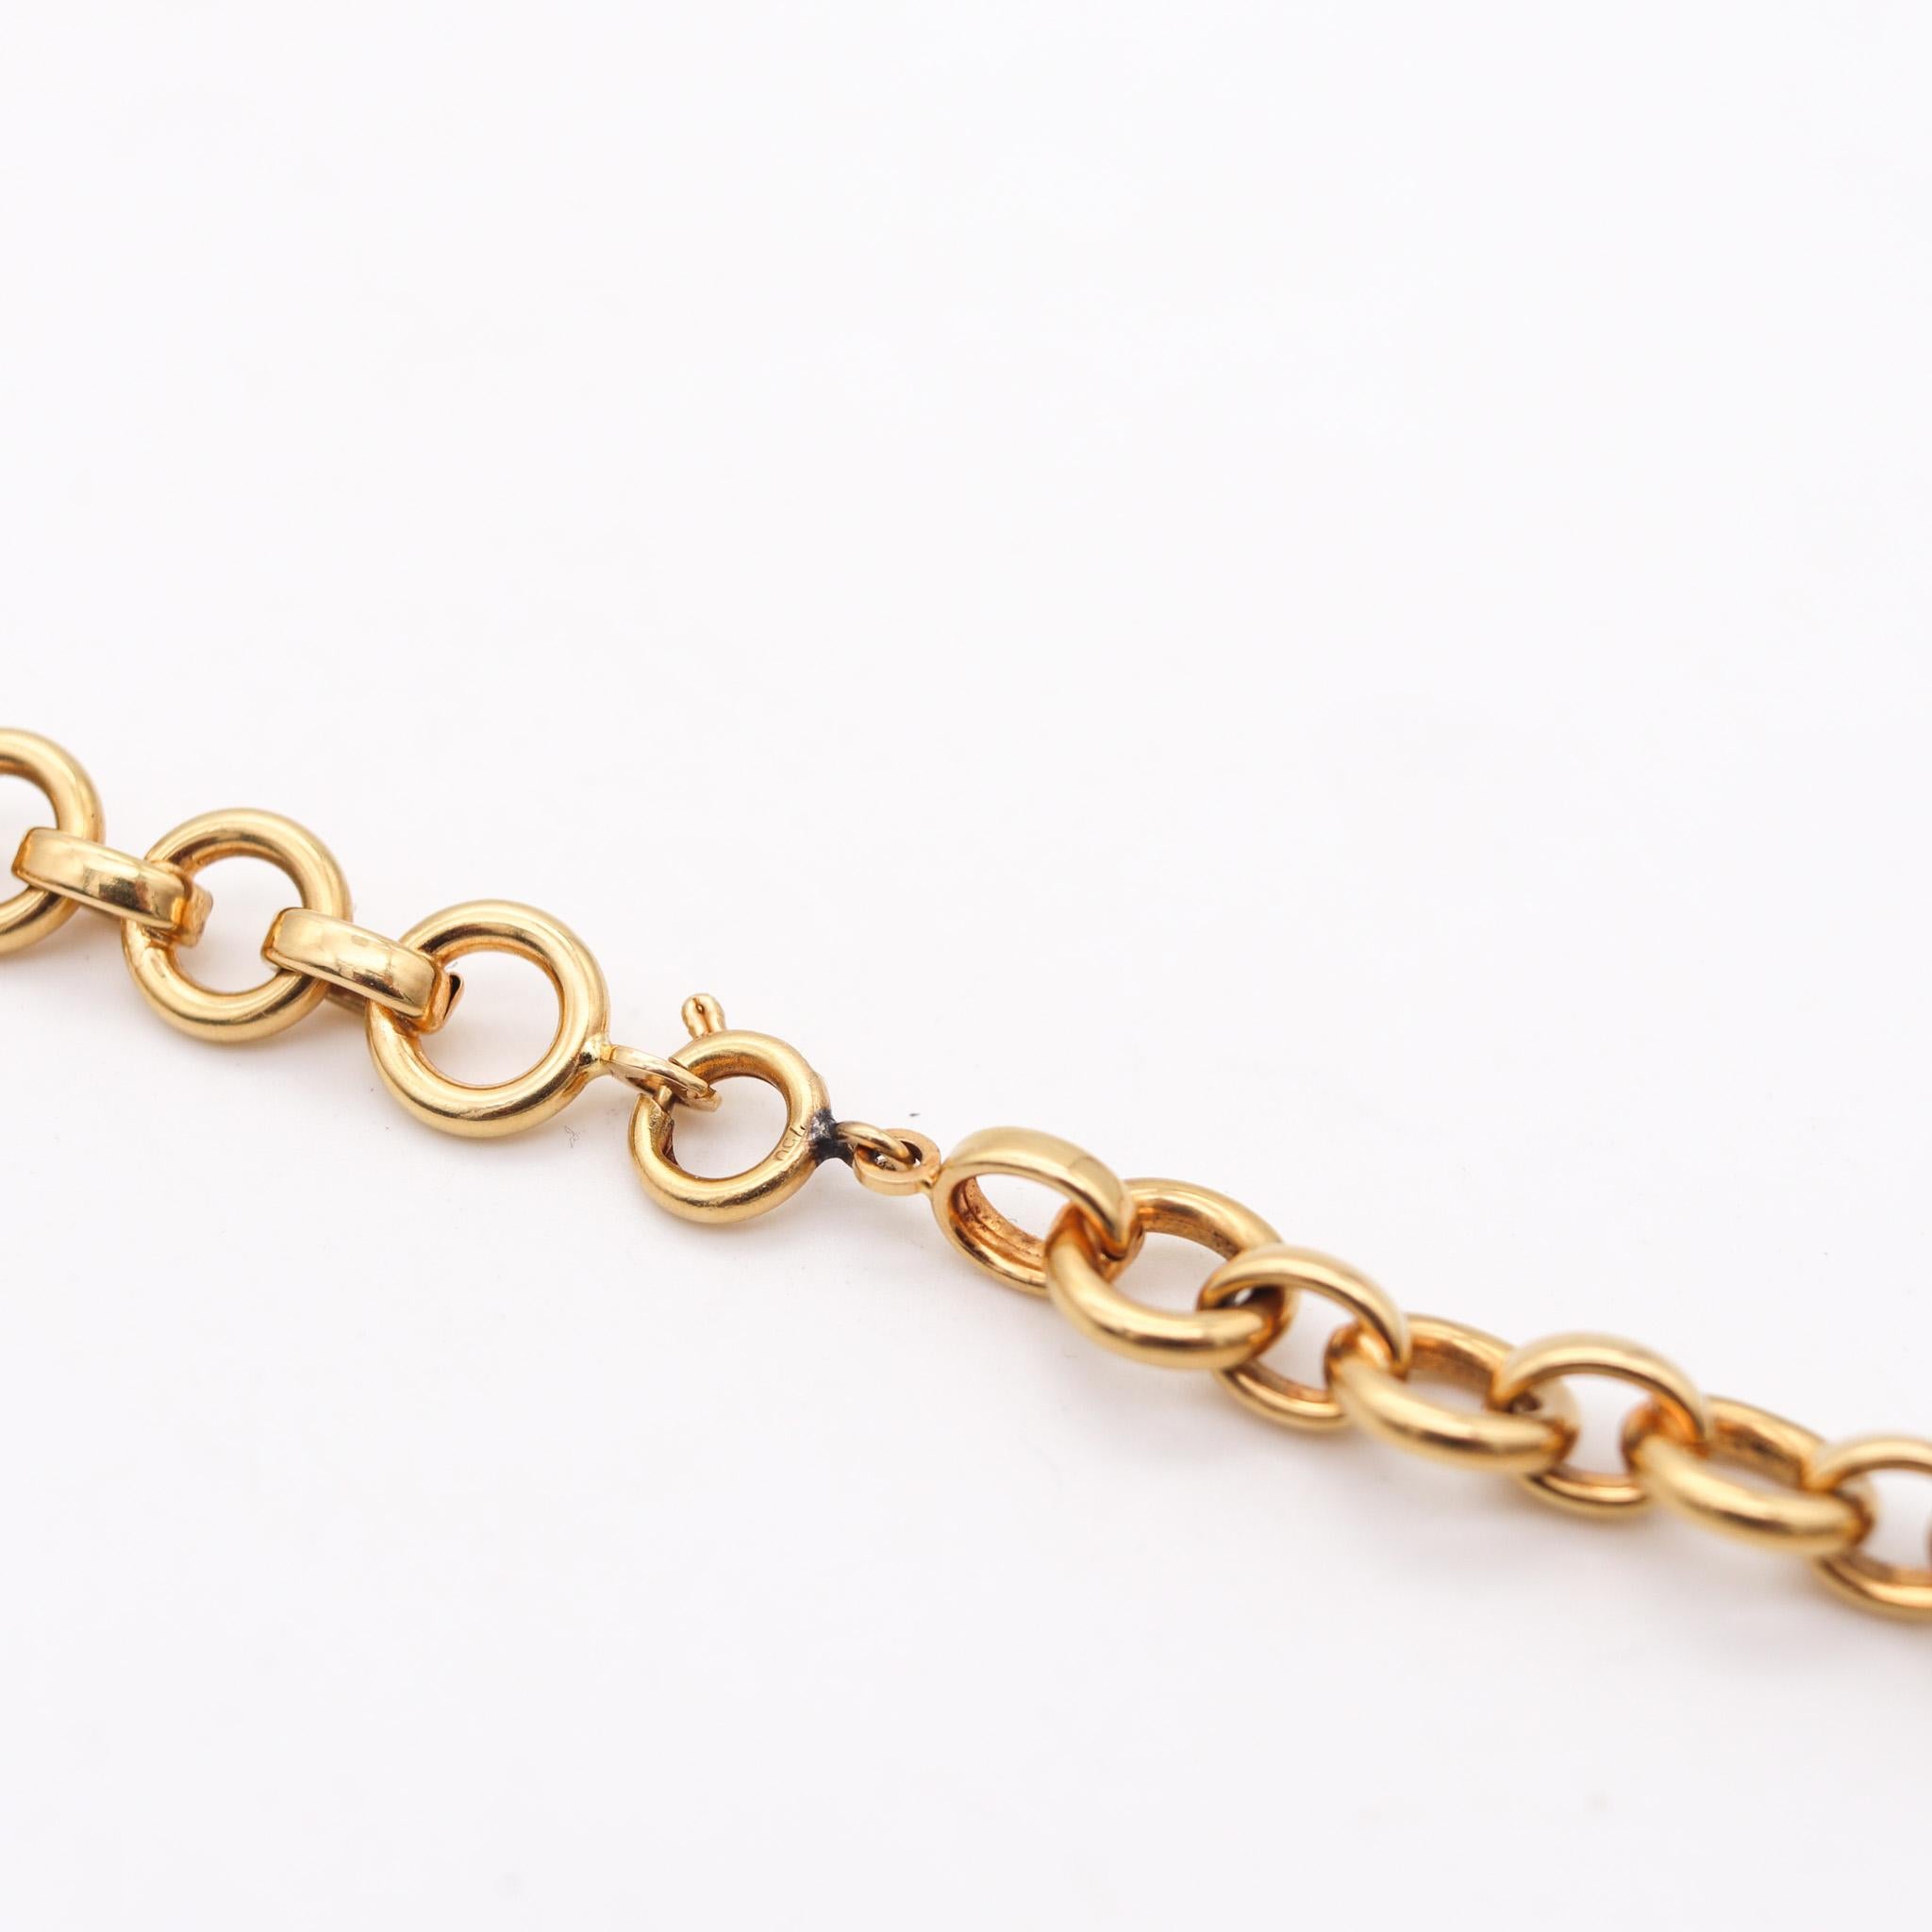 Bruno Dal Lago 1970 Vicenza Modernist Links Chain In Polished 18Kt Yellow Gold For Sale 1